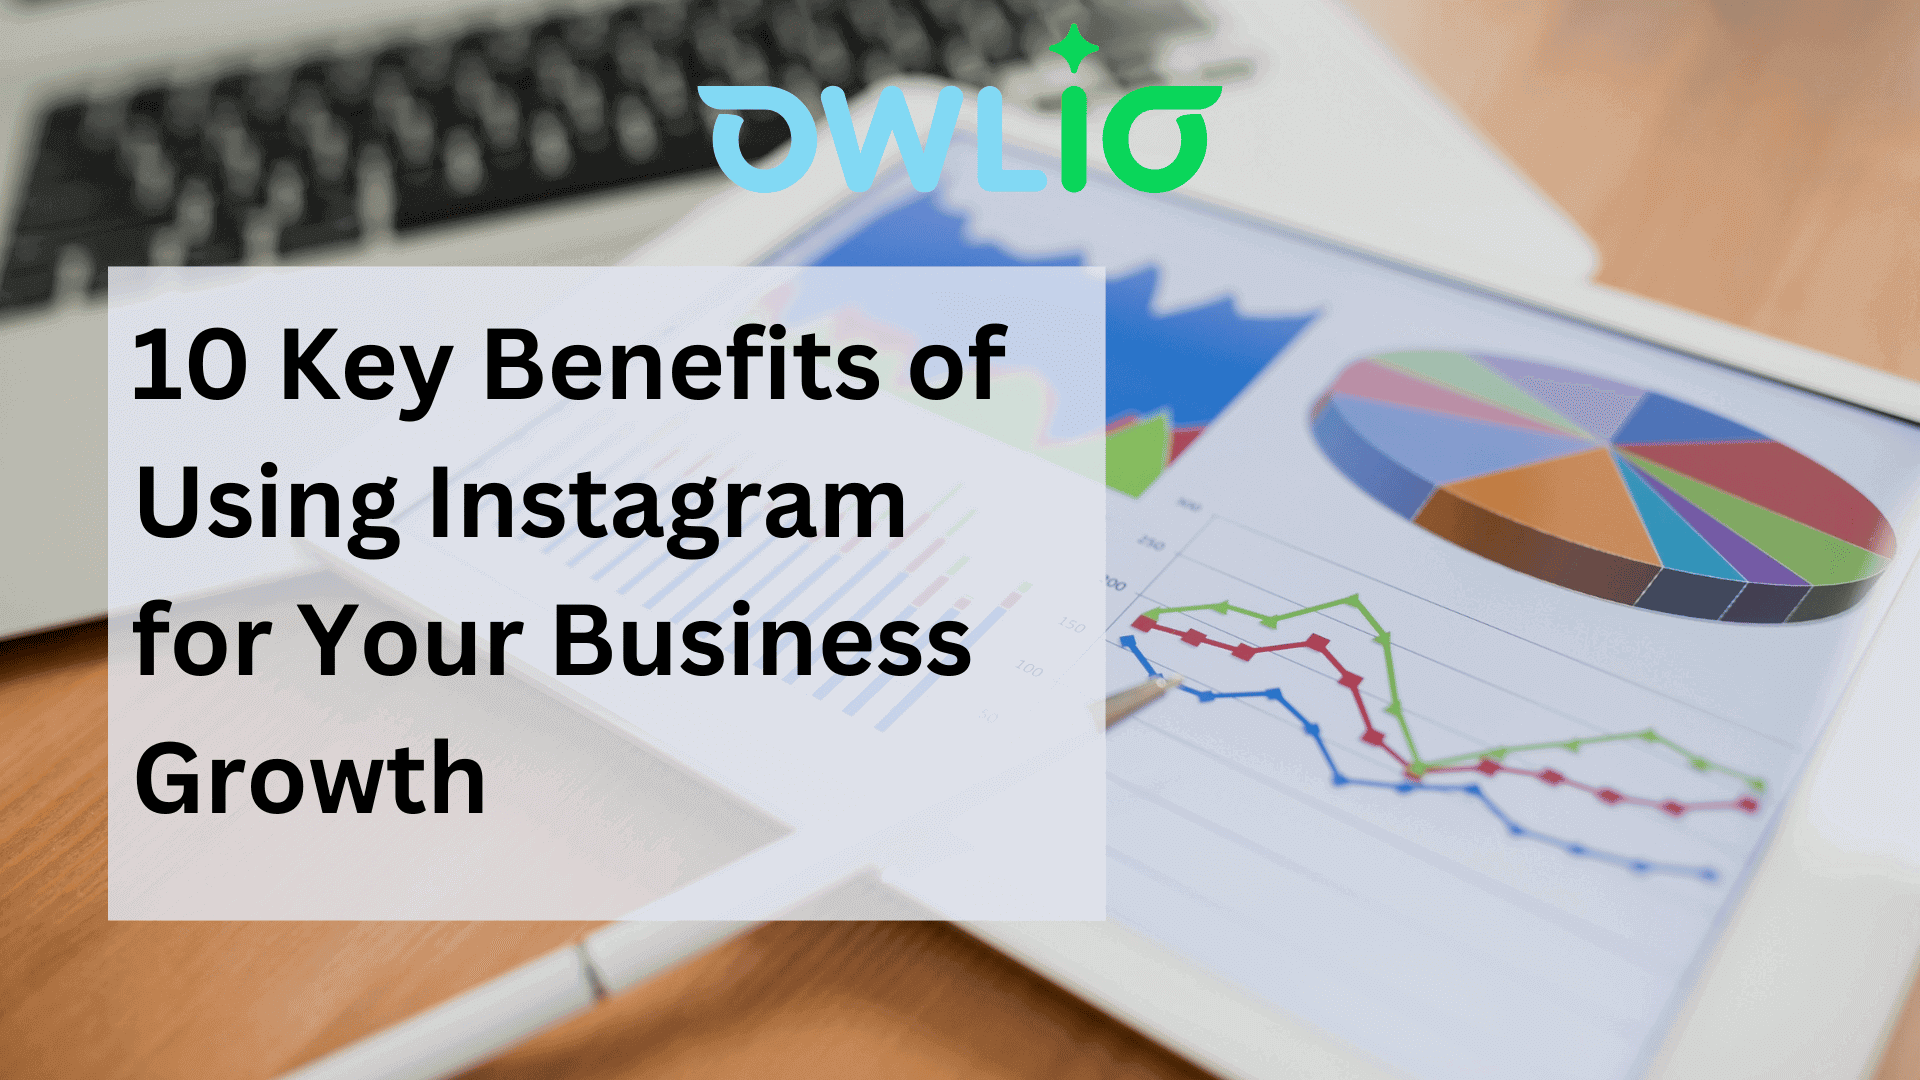 10 Key Benefits of Using Instagram for Your Business Growth